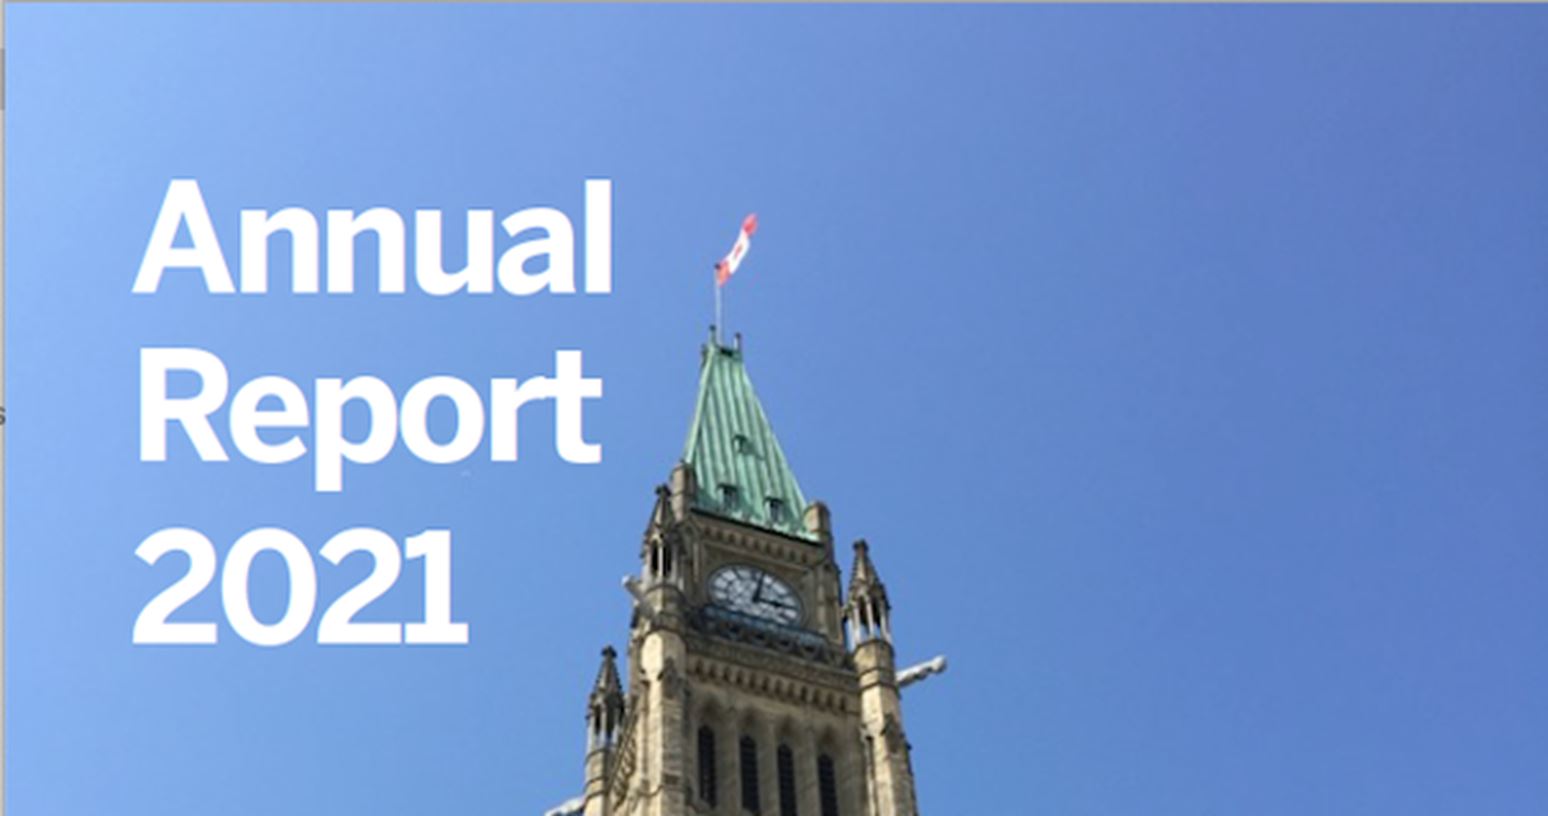 Lawrence National Centre's 2021 Annual Report